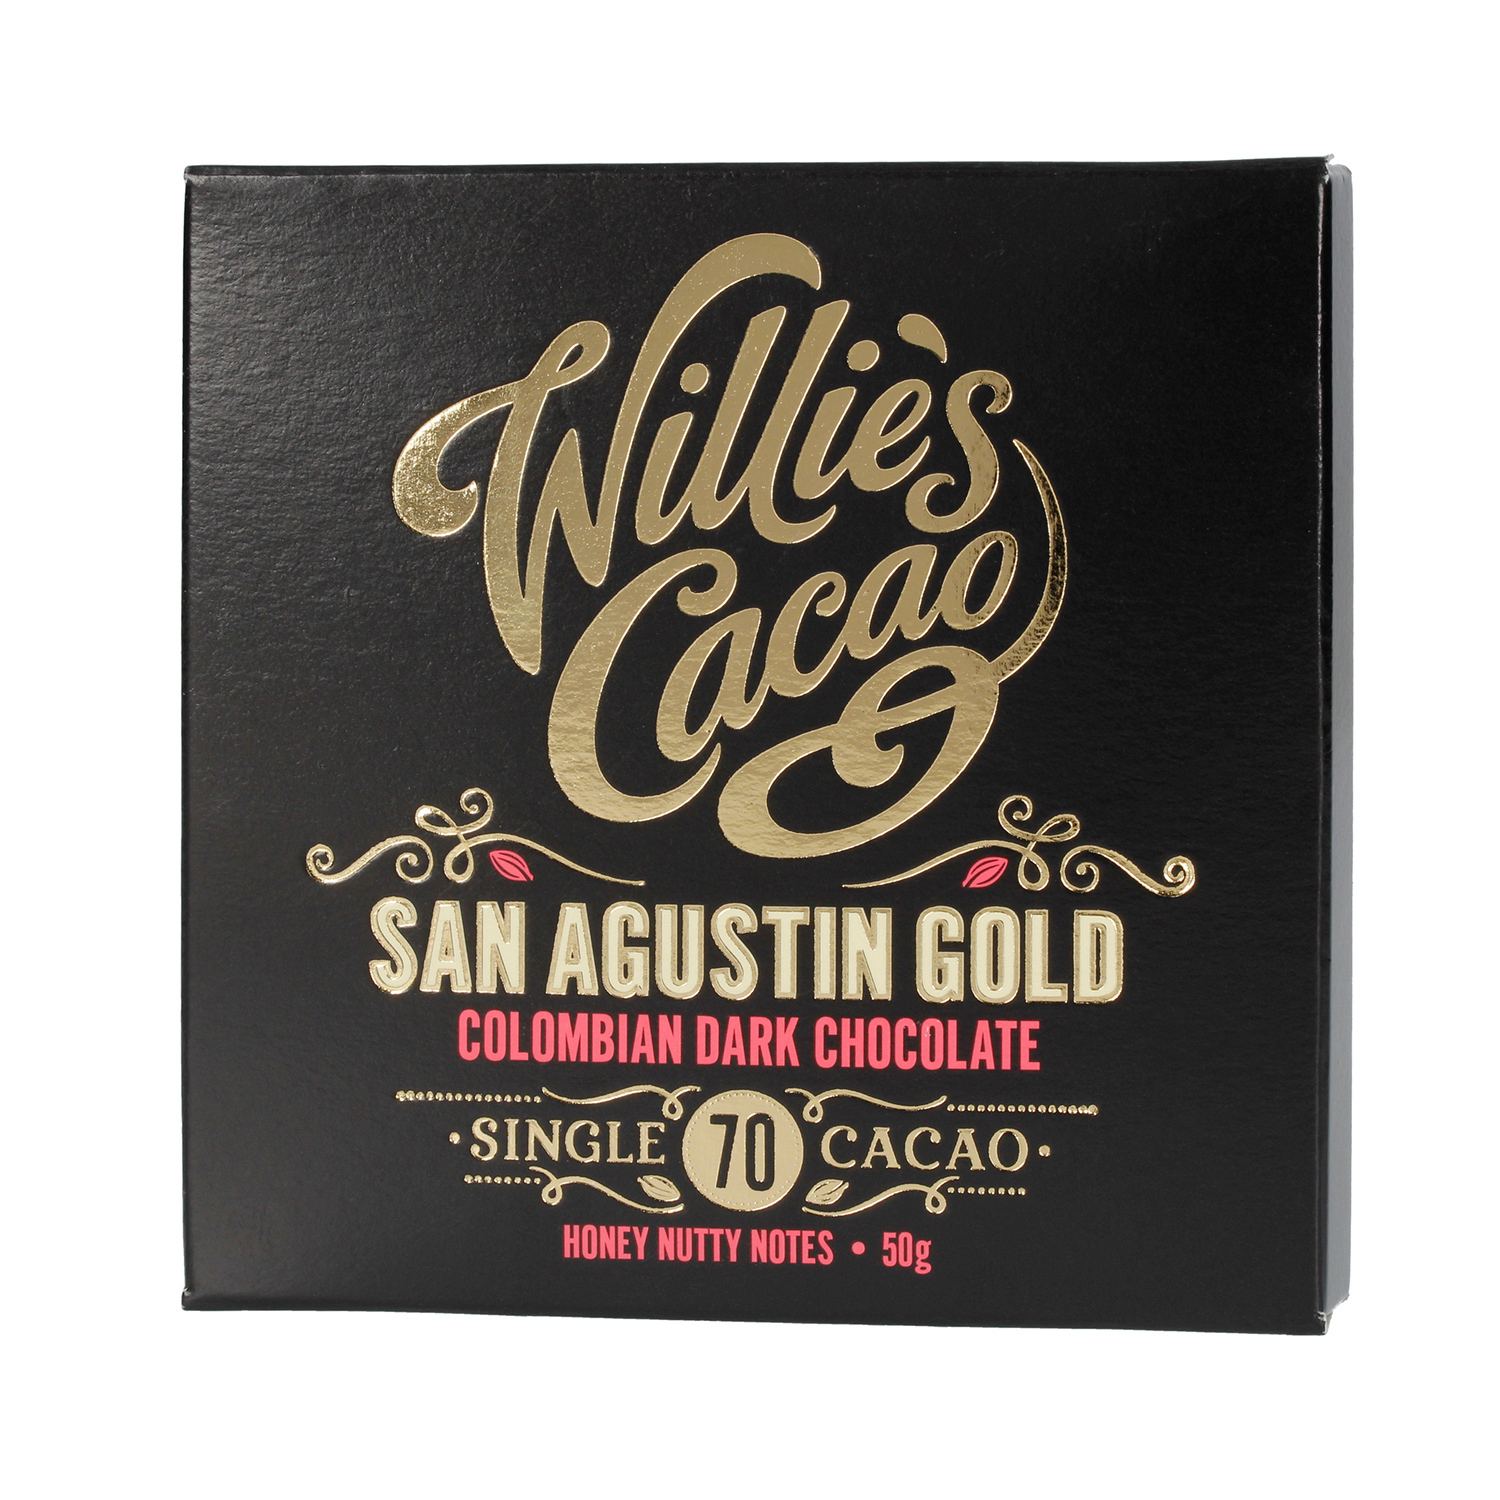 Willie's Cacao - 70% San Agustin Gold Colombia Chocolate 50g